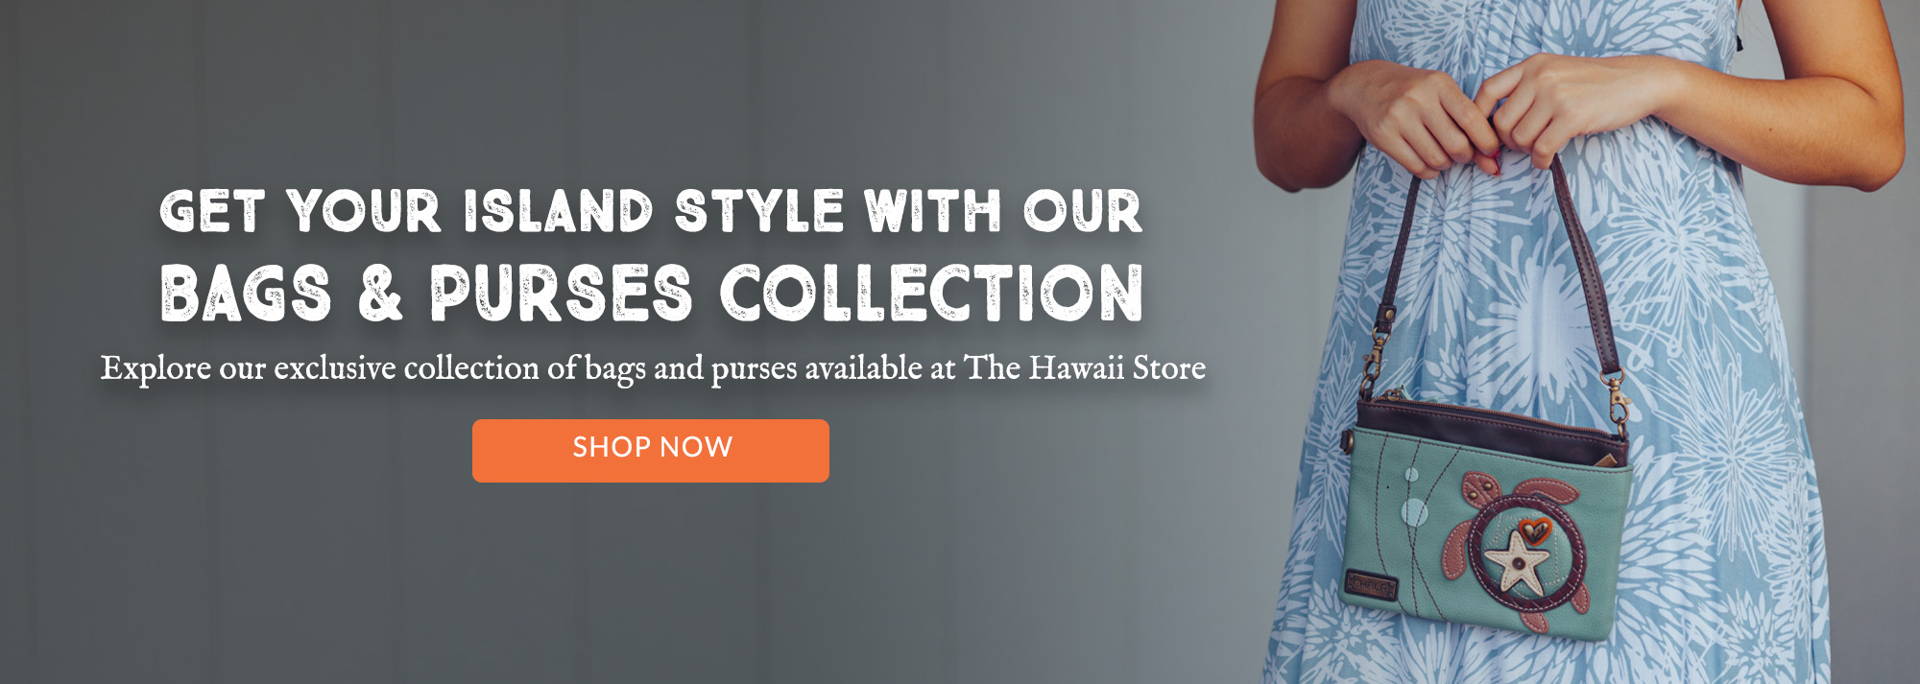 Get your island style with our bags & purses collection! Explore our exclusive collection of bags and purses available at The Hawaii Store!